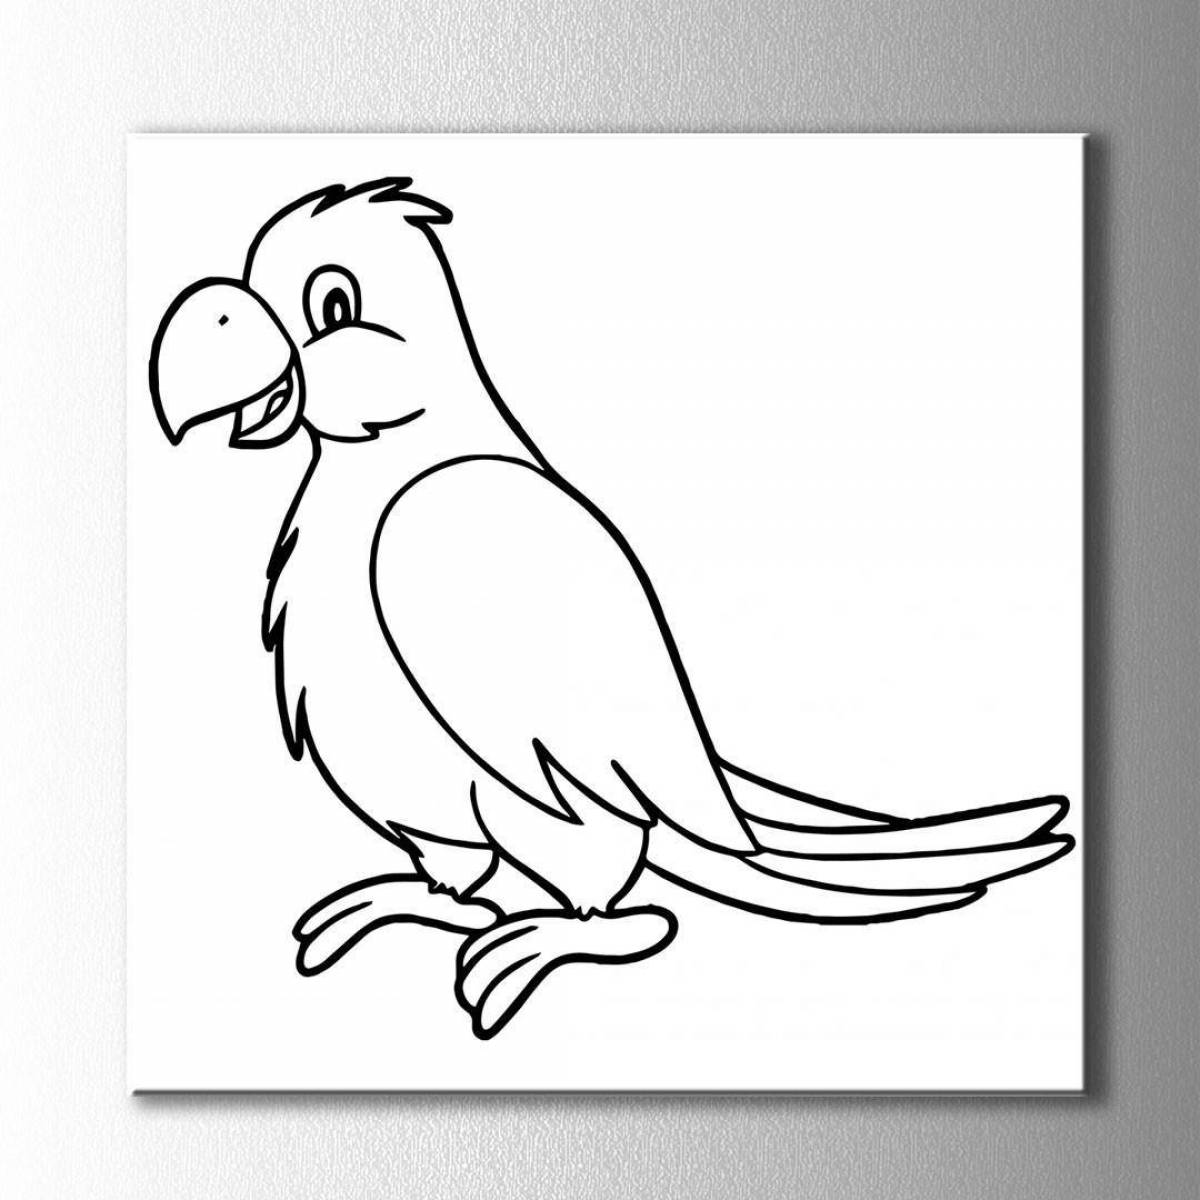 Exquisite parrot coloring book for 6-7 year olds